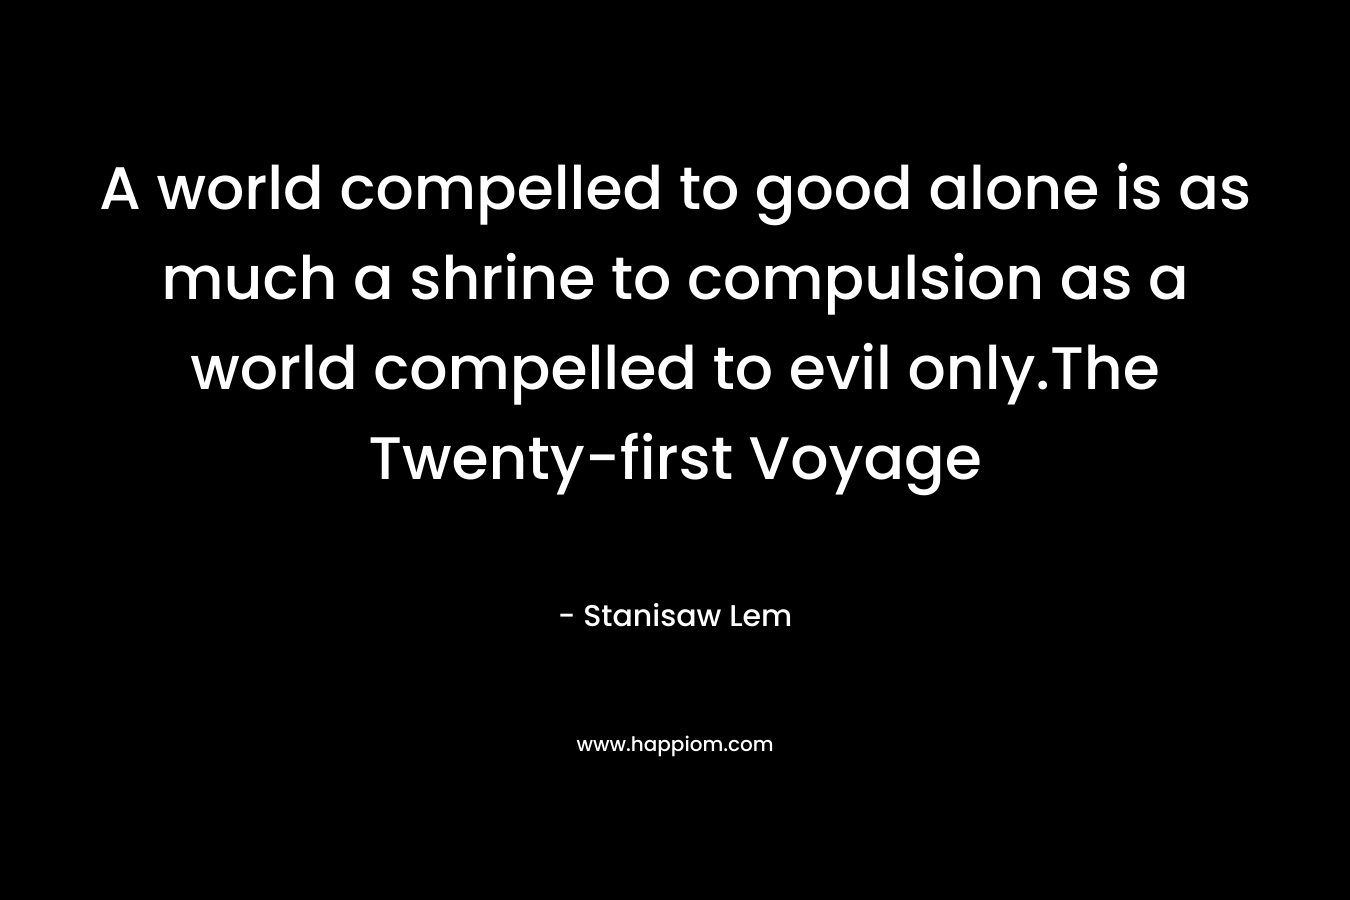 A world compelled to good alone is as much a shrine to compulsion as a world compelled to evil only.The Twenty-first Voyage – Stanisaw Lem